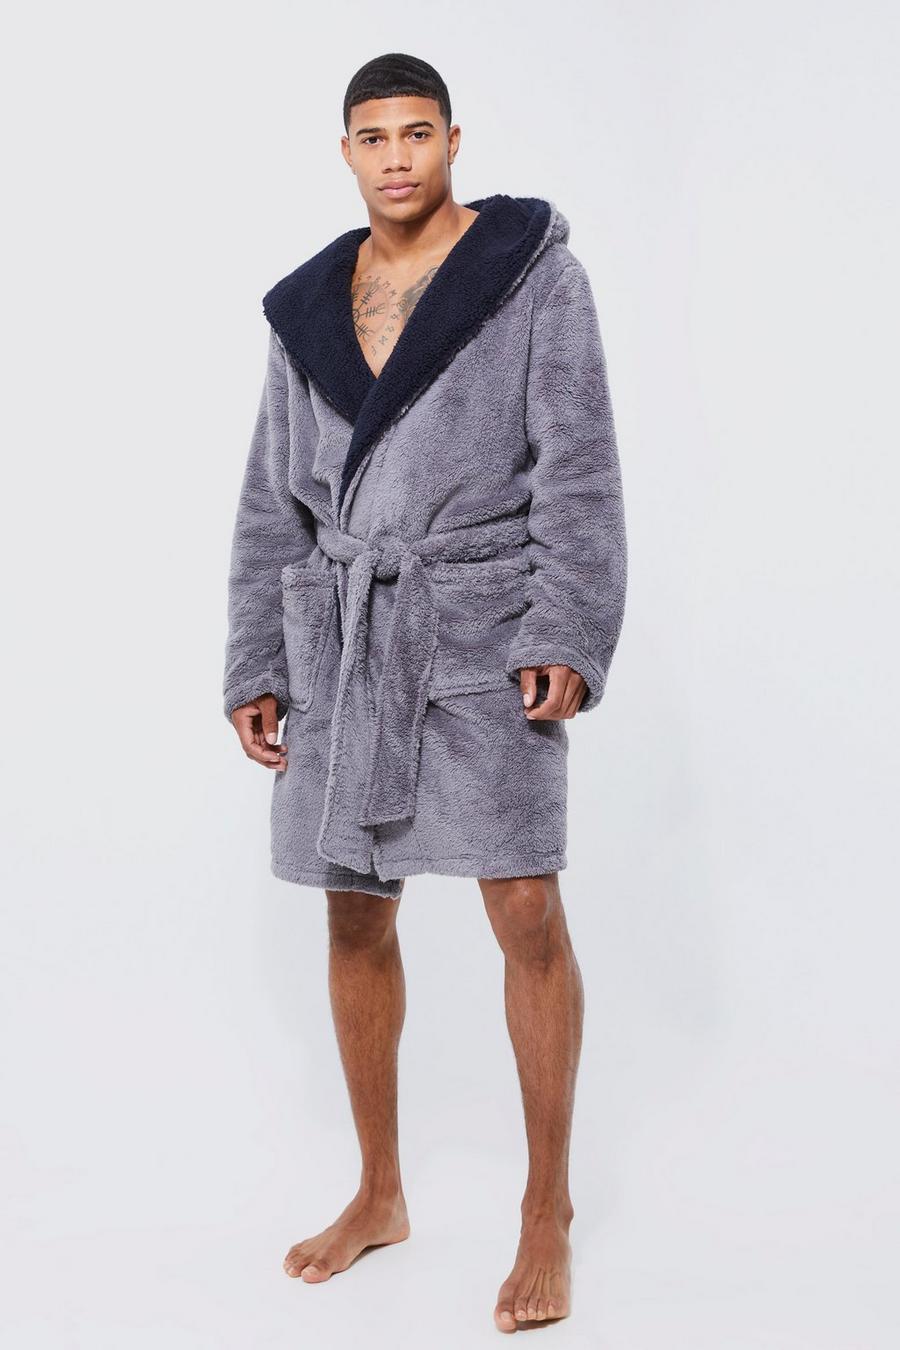 Charcoal grey Borg Lined Hooded Dressing Gown 